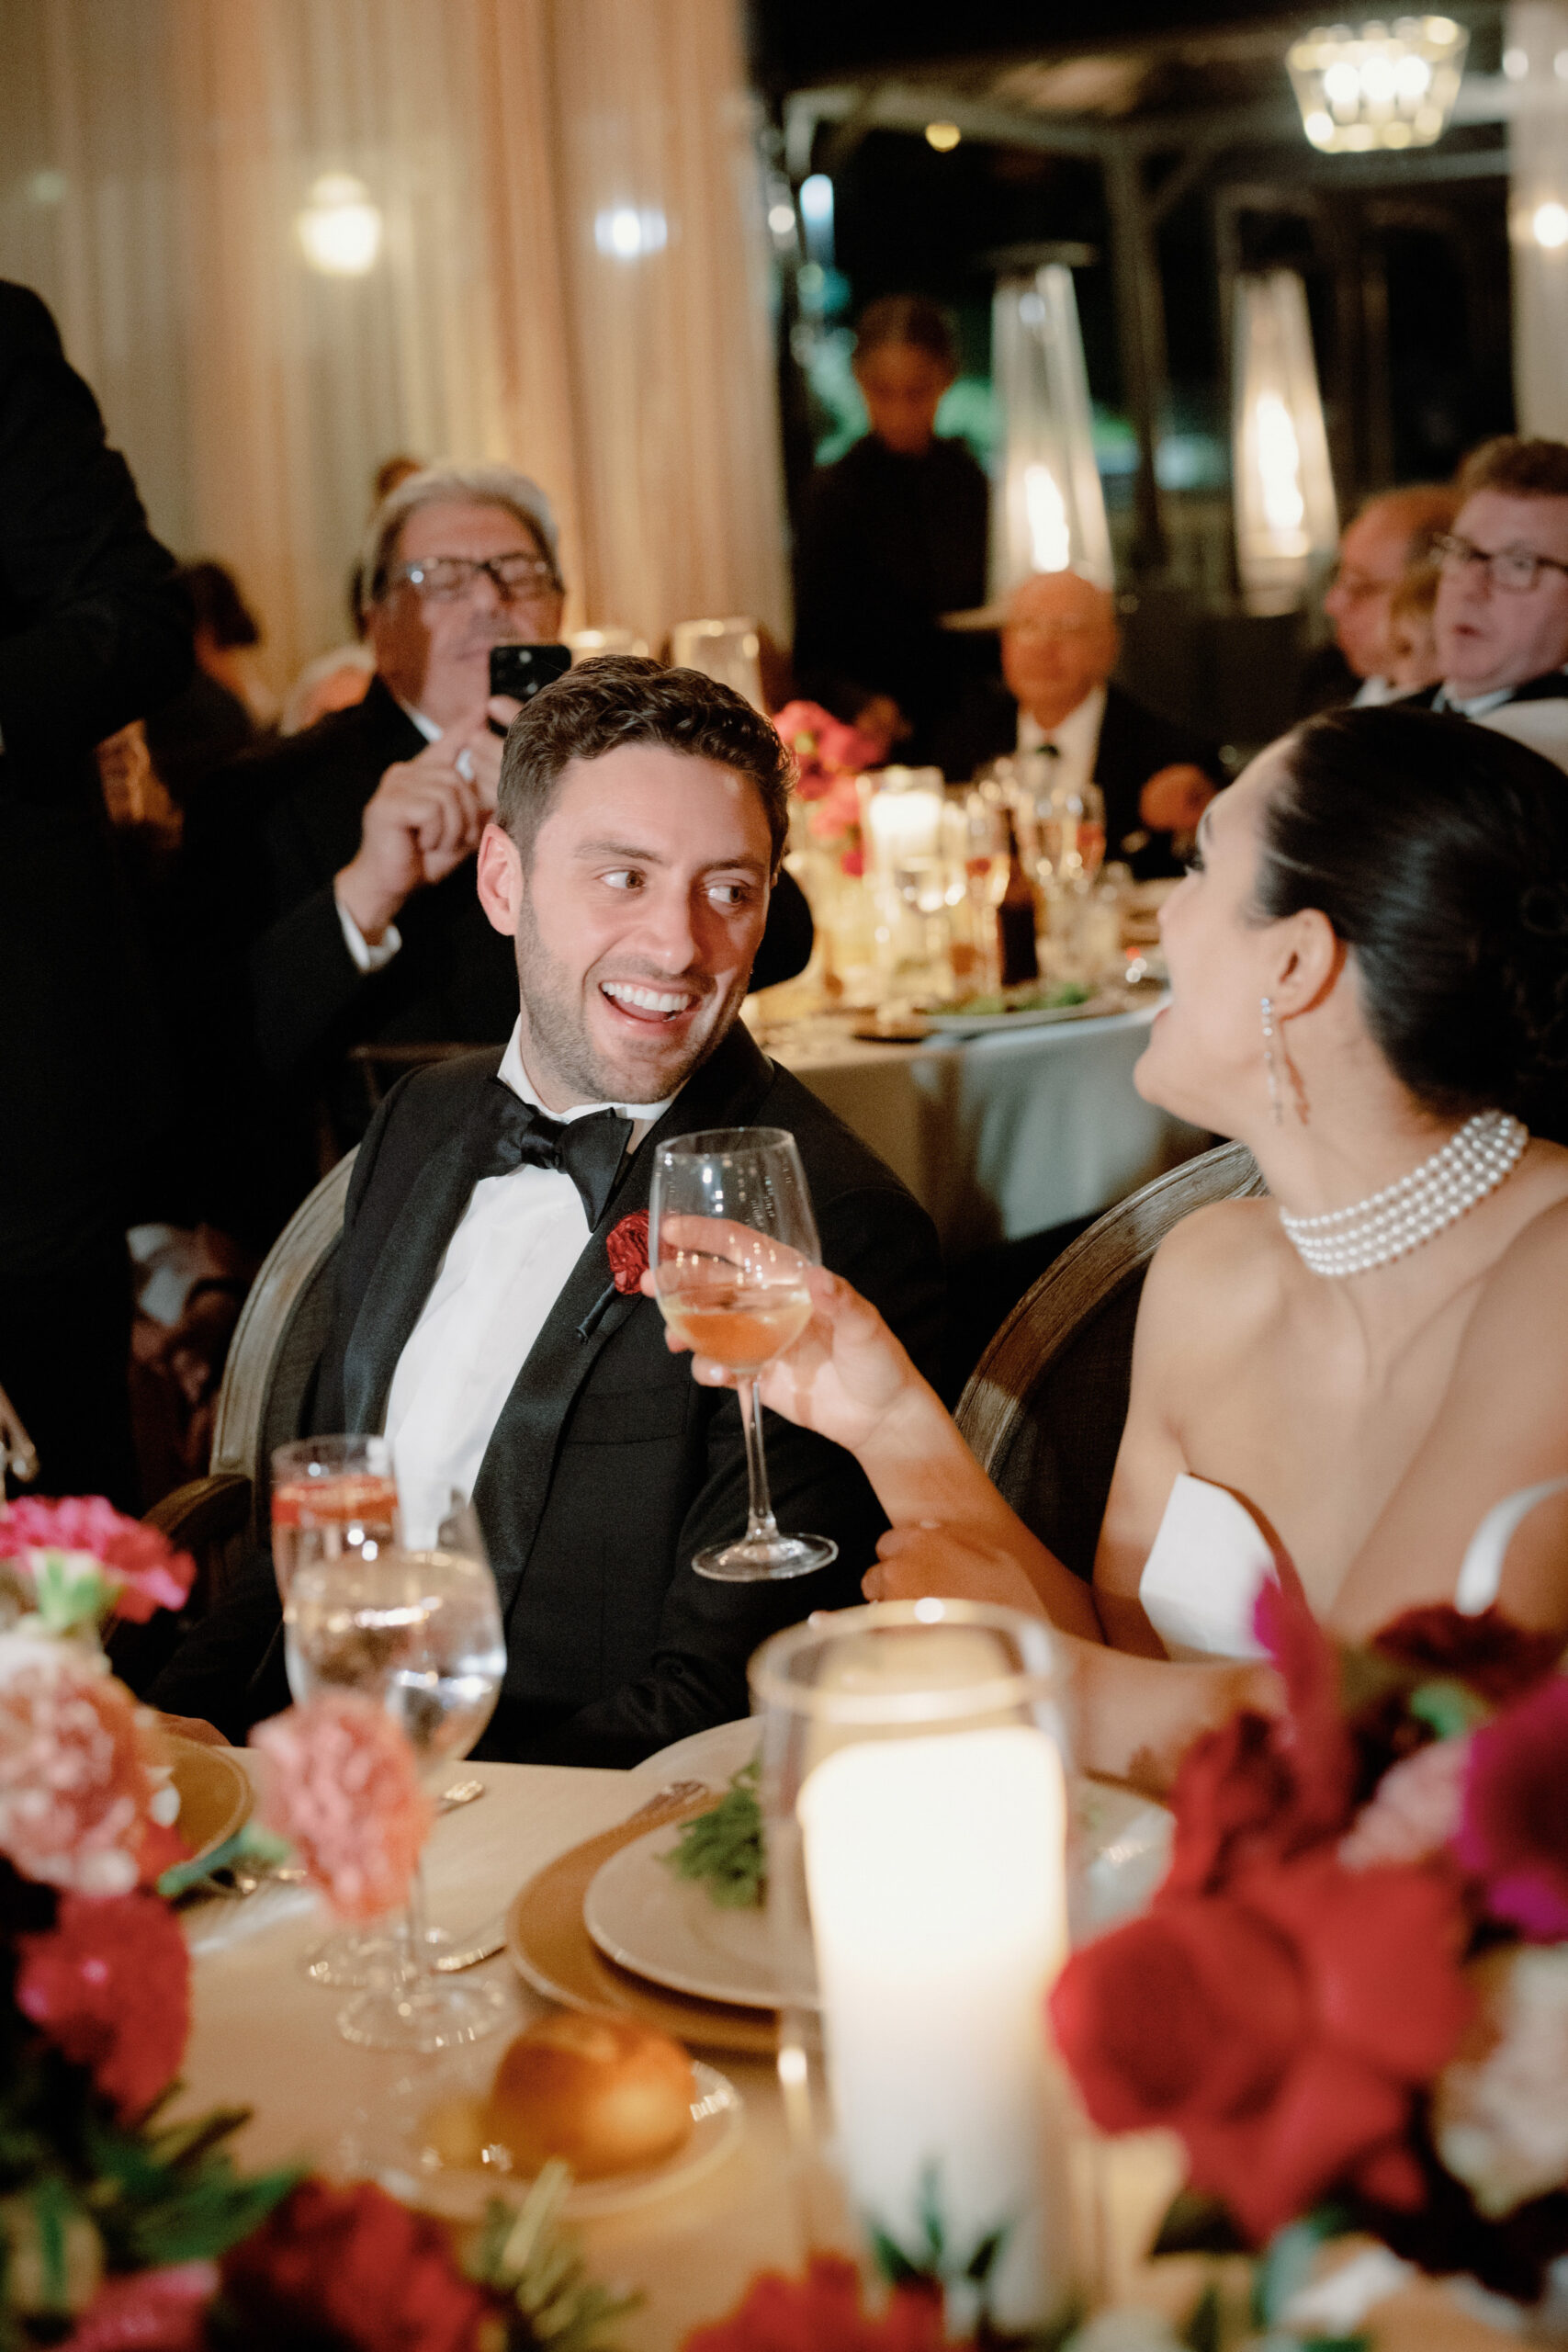 Candid photo of the newlyweds having a fun time in their reception party. Image by Jenny Fu Studio